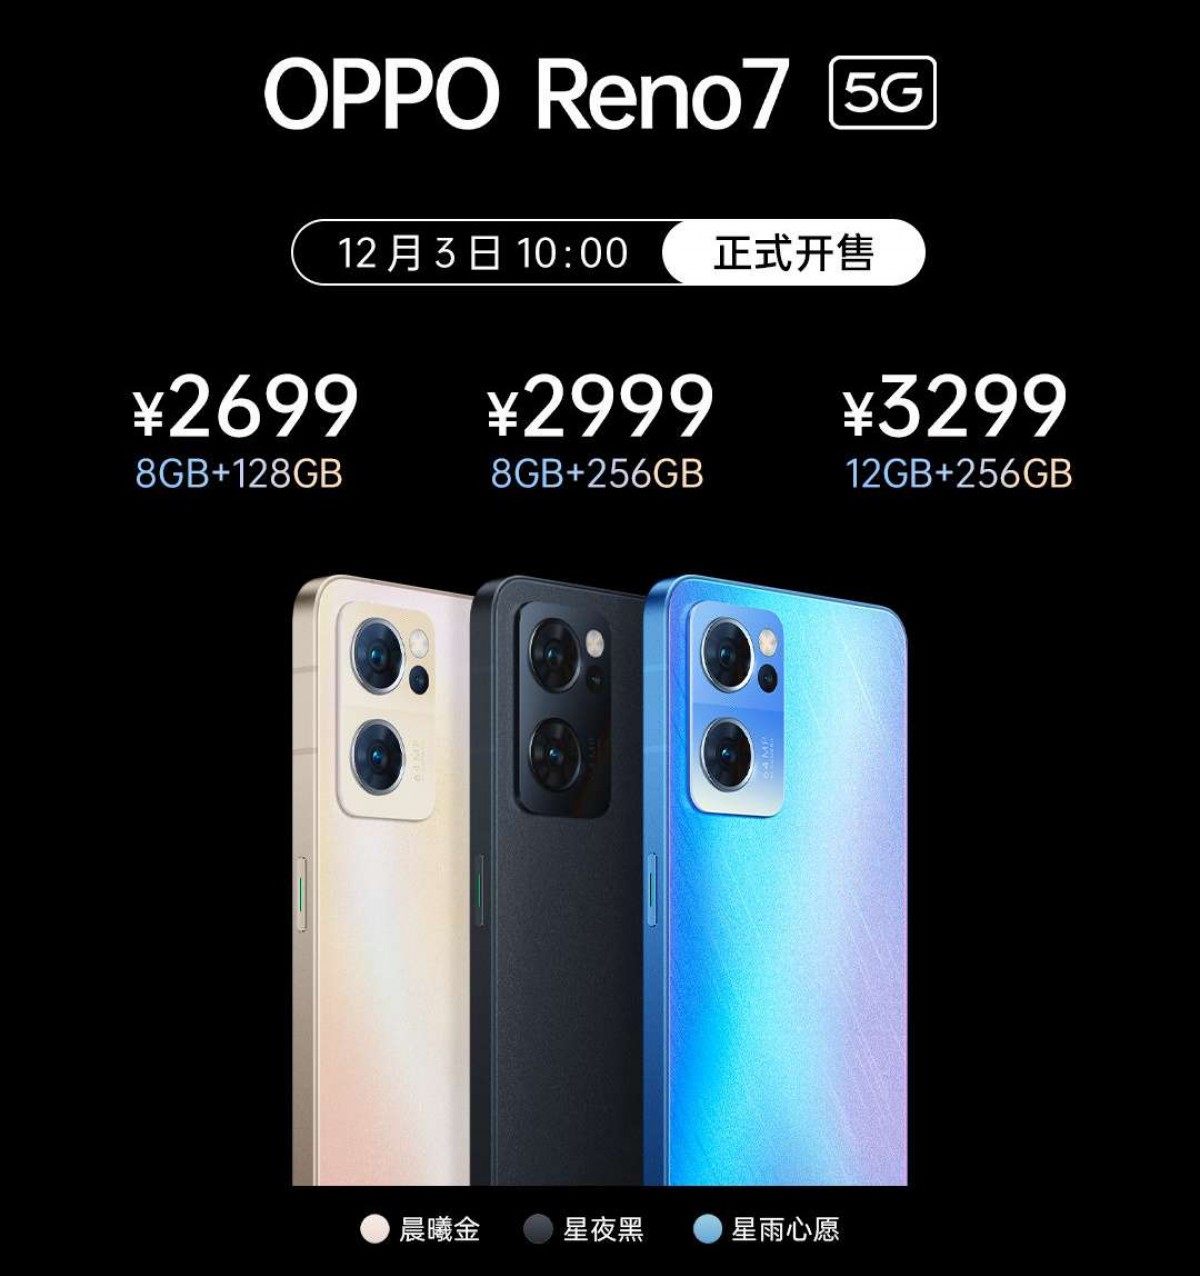 Oppe Reno 7 Series Launching On November 25: Know Details, Specs And More